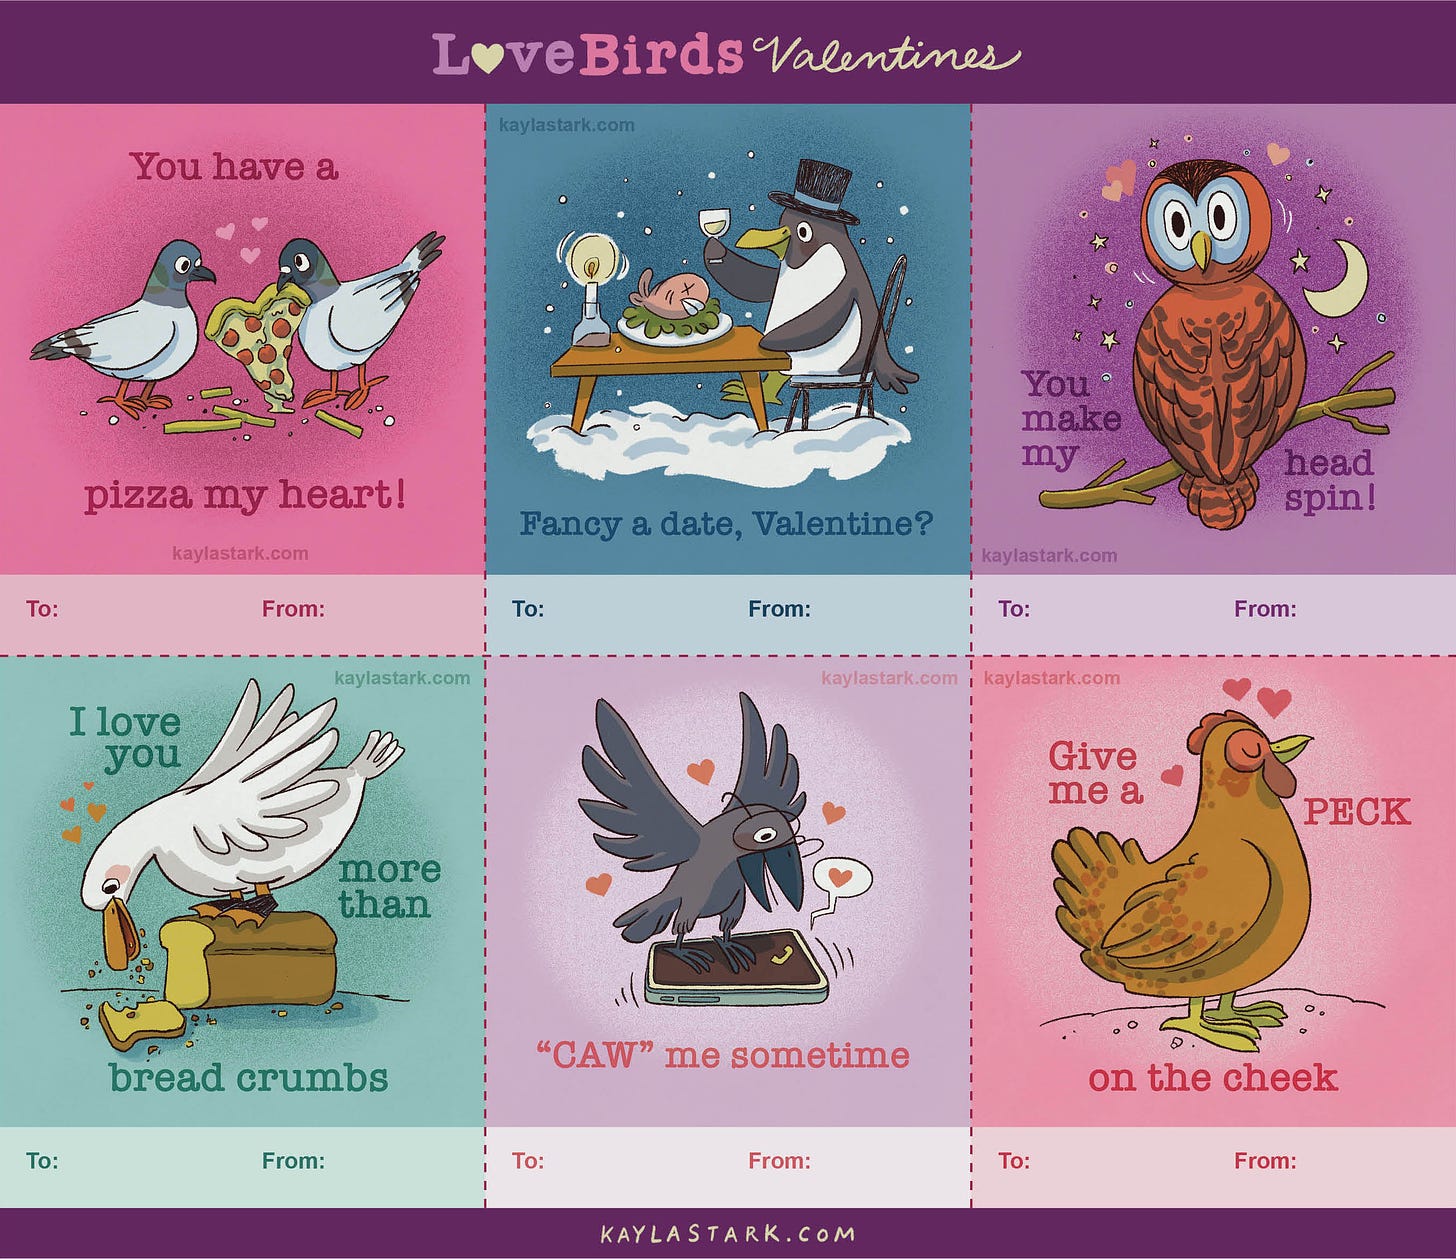 illustrated bird valentines in final layout by kayla stark